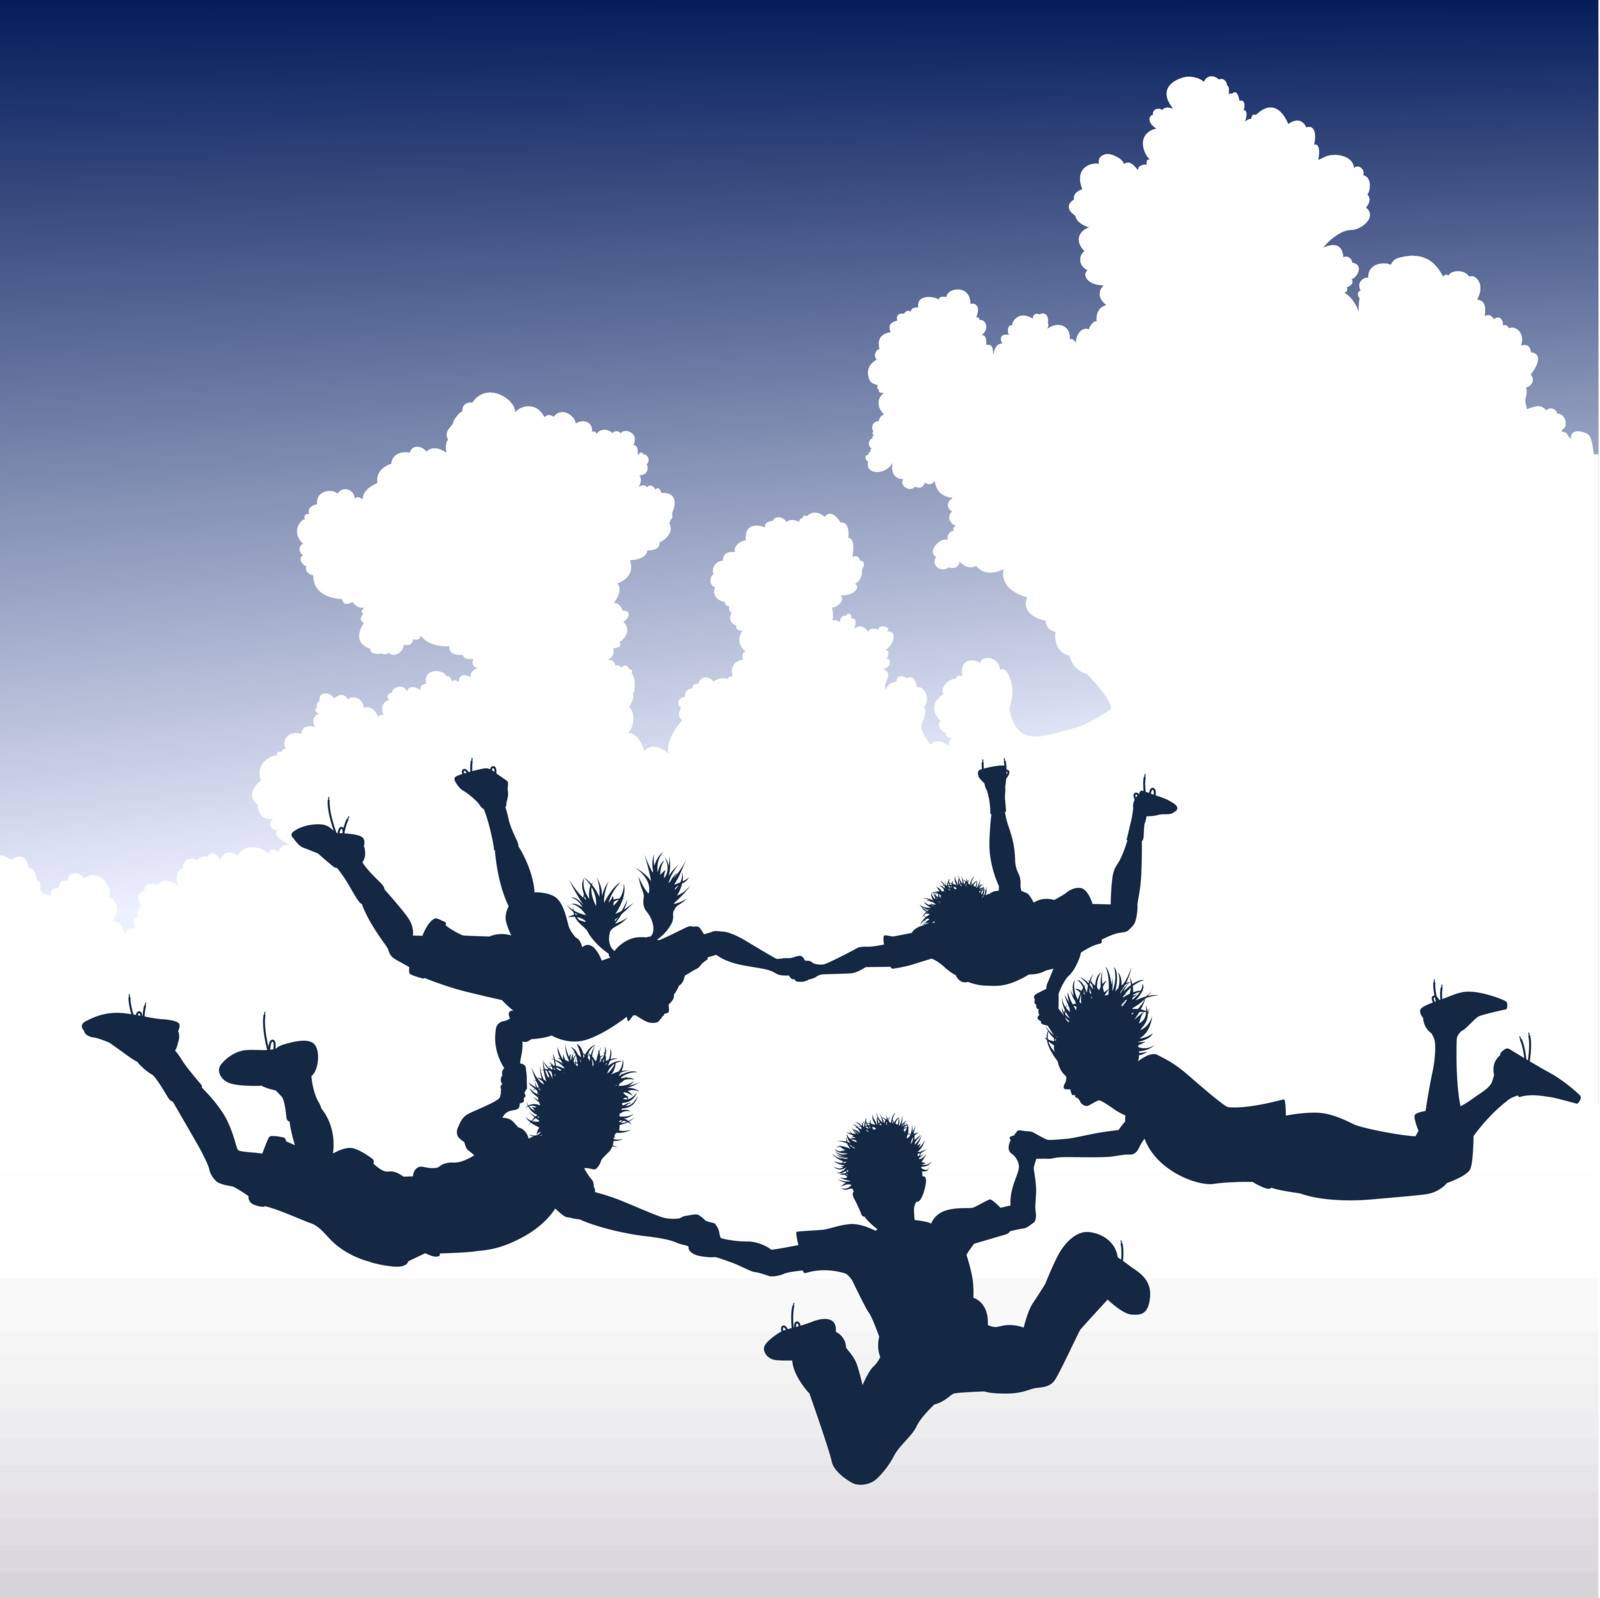 Editable vector illustration of a ring of skydiving children